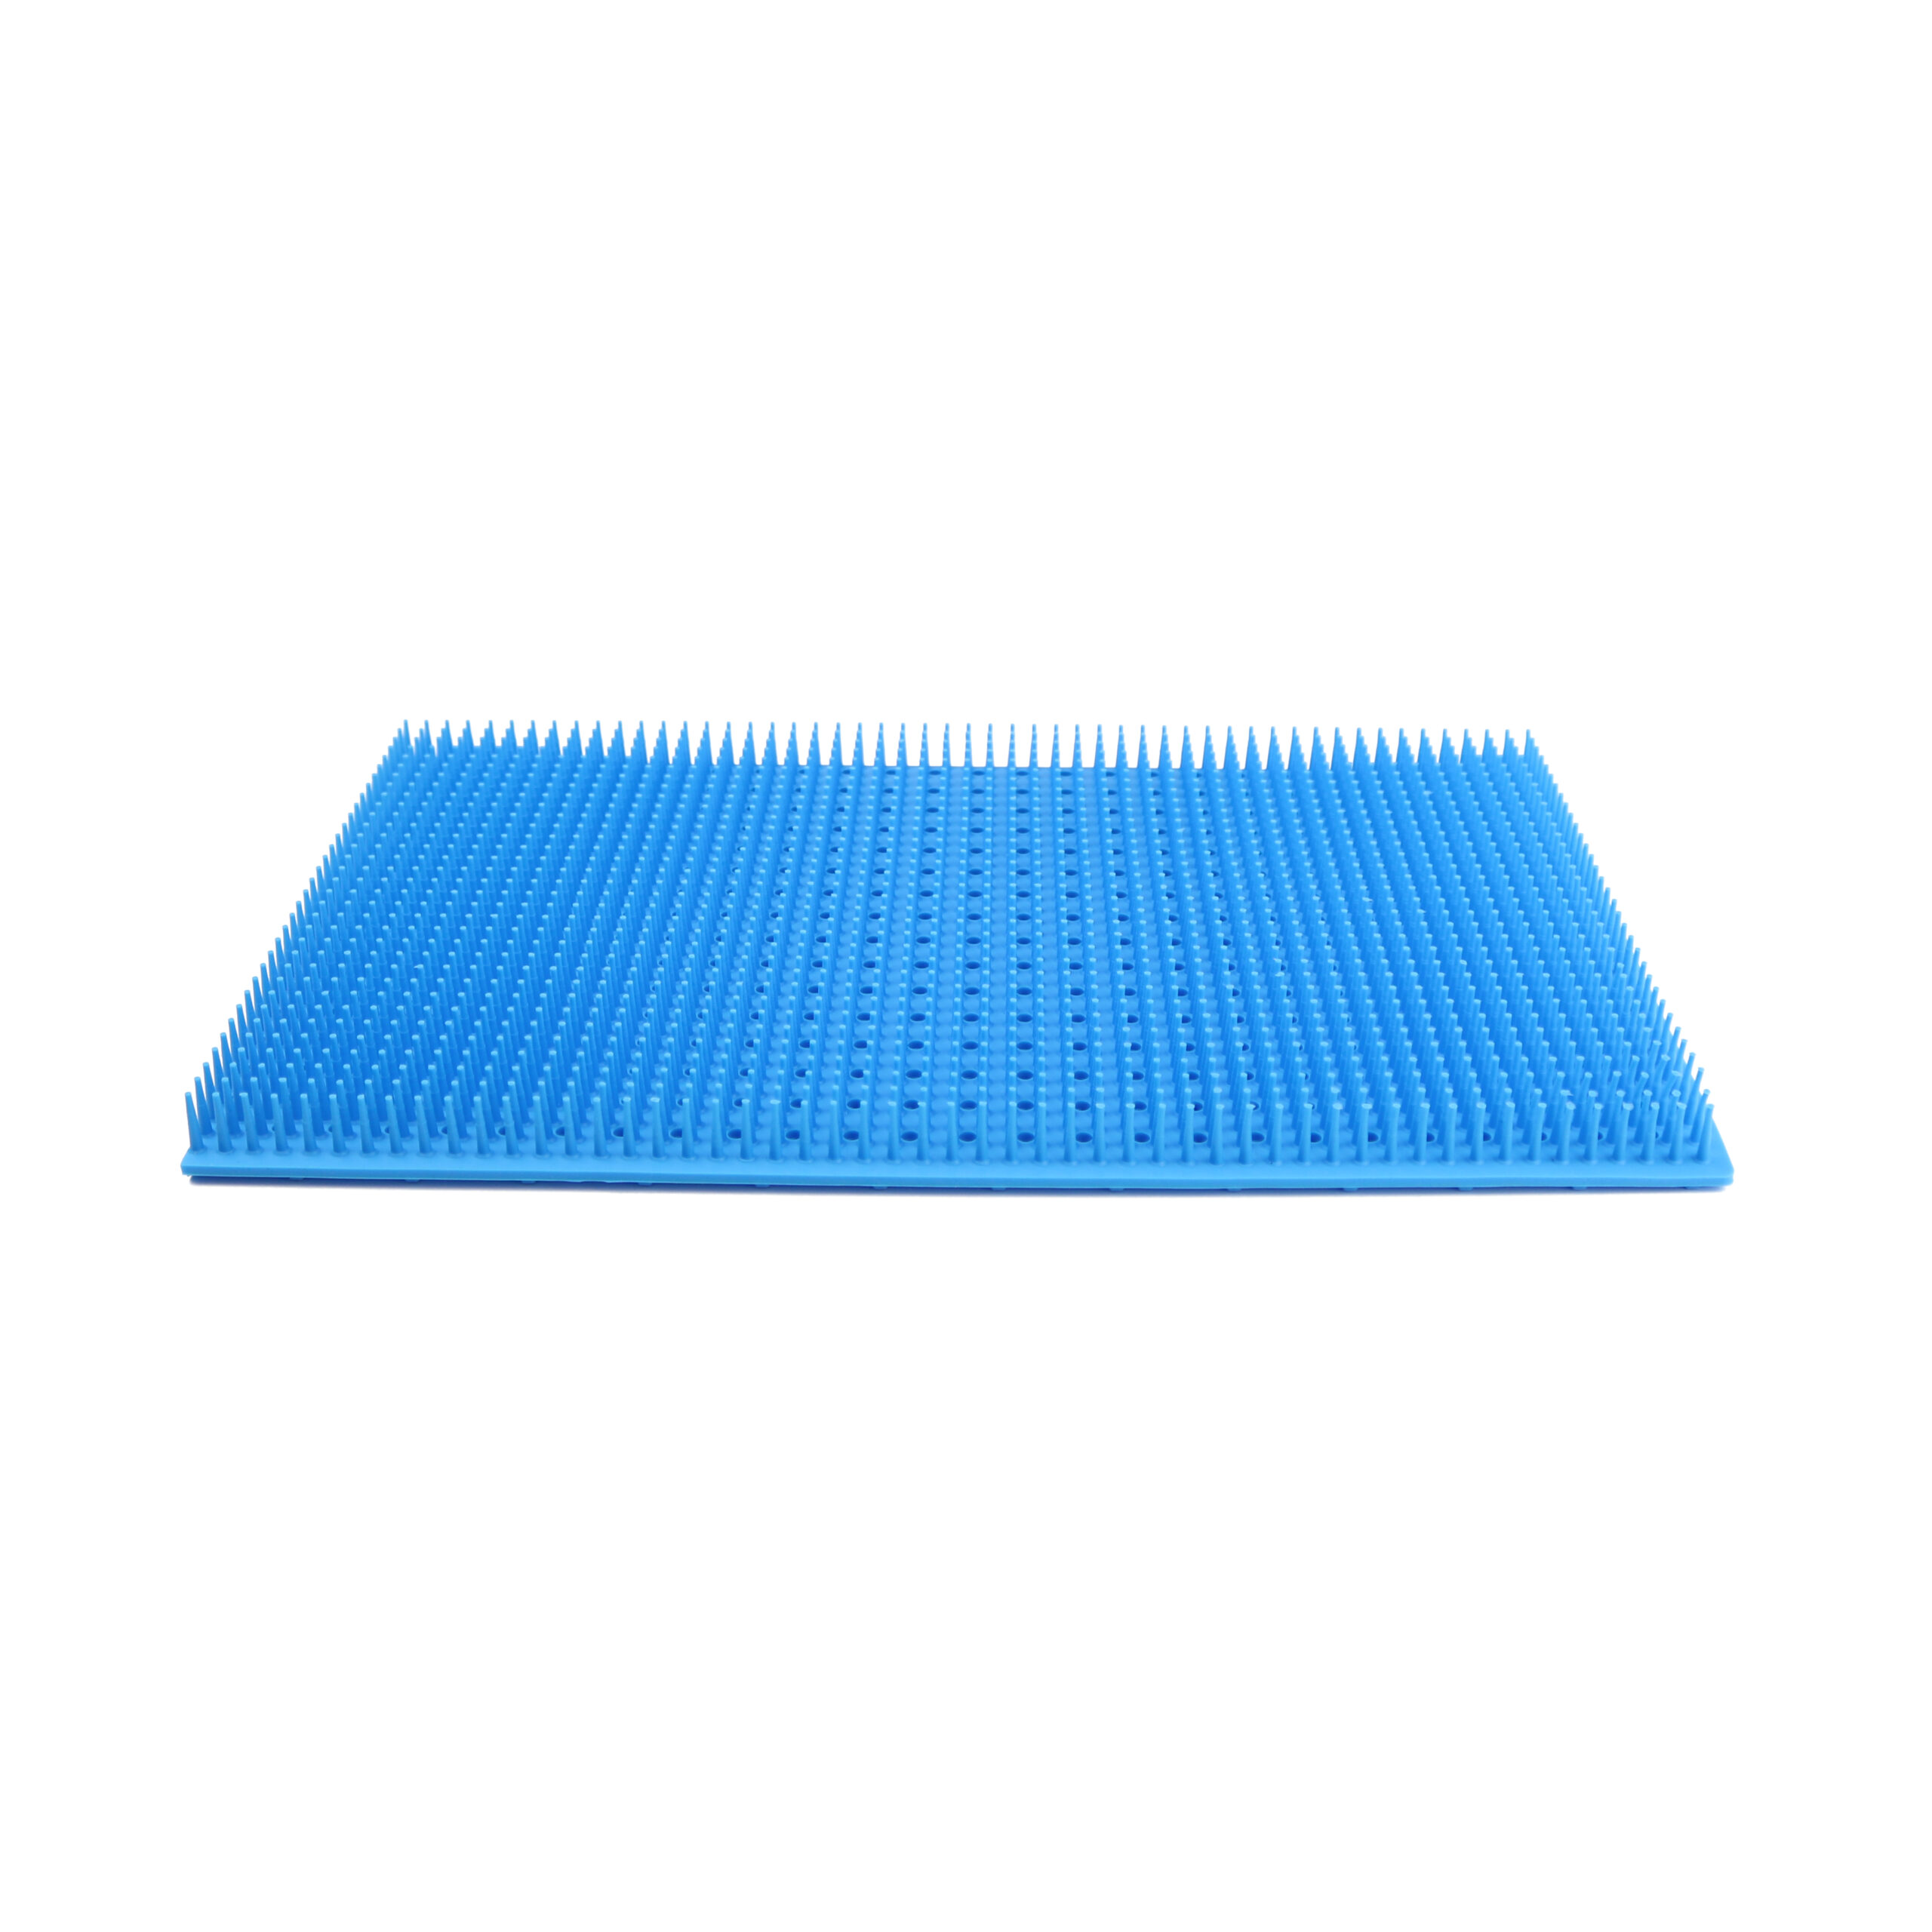 silicone mat silicone mats for sterilization tray 760mm*480mm*20mm